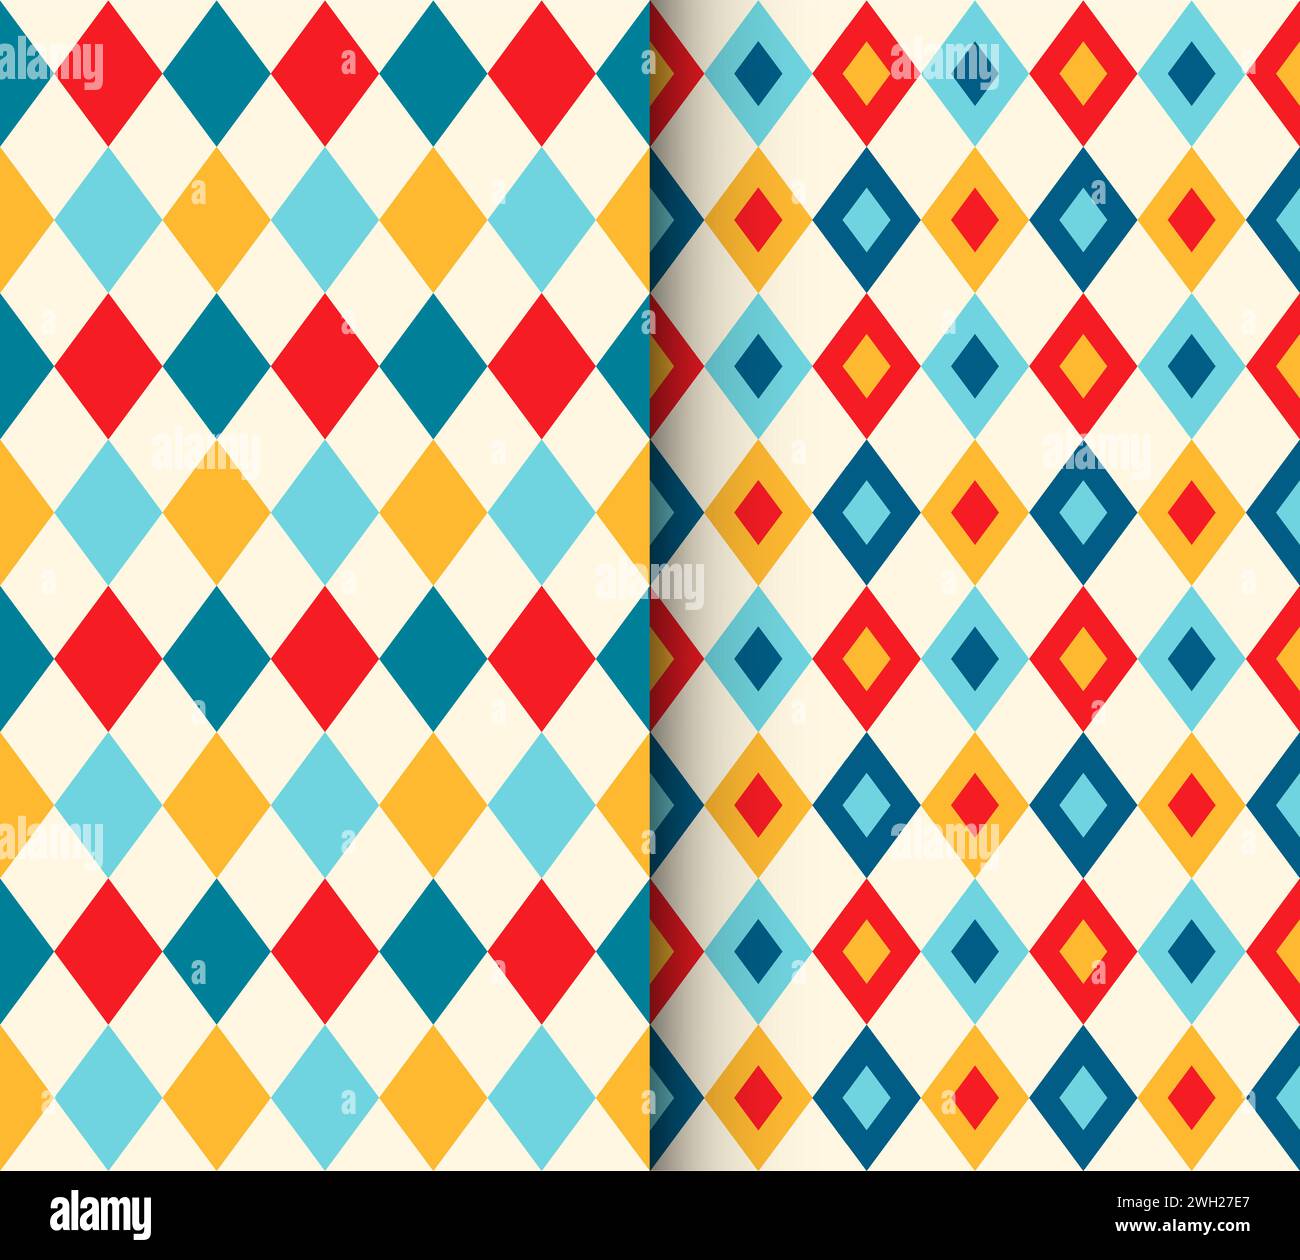 Circus harlequin patterns, rhombus lozenge pattern with diamond-shaped motifs in contrasting colors. Vector visually striking and repetitive tile design associated with traditional theatrical costumes Stock Vector